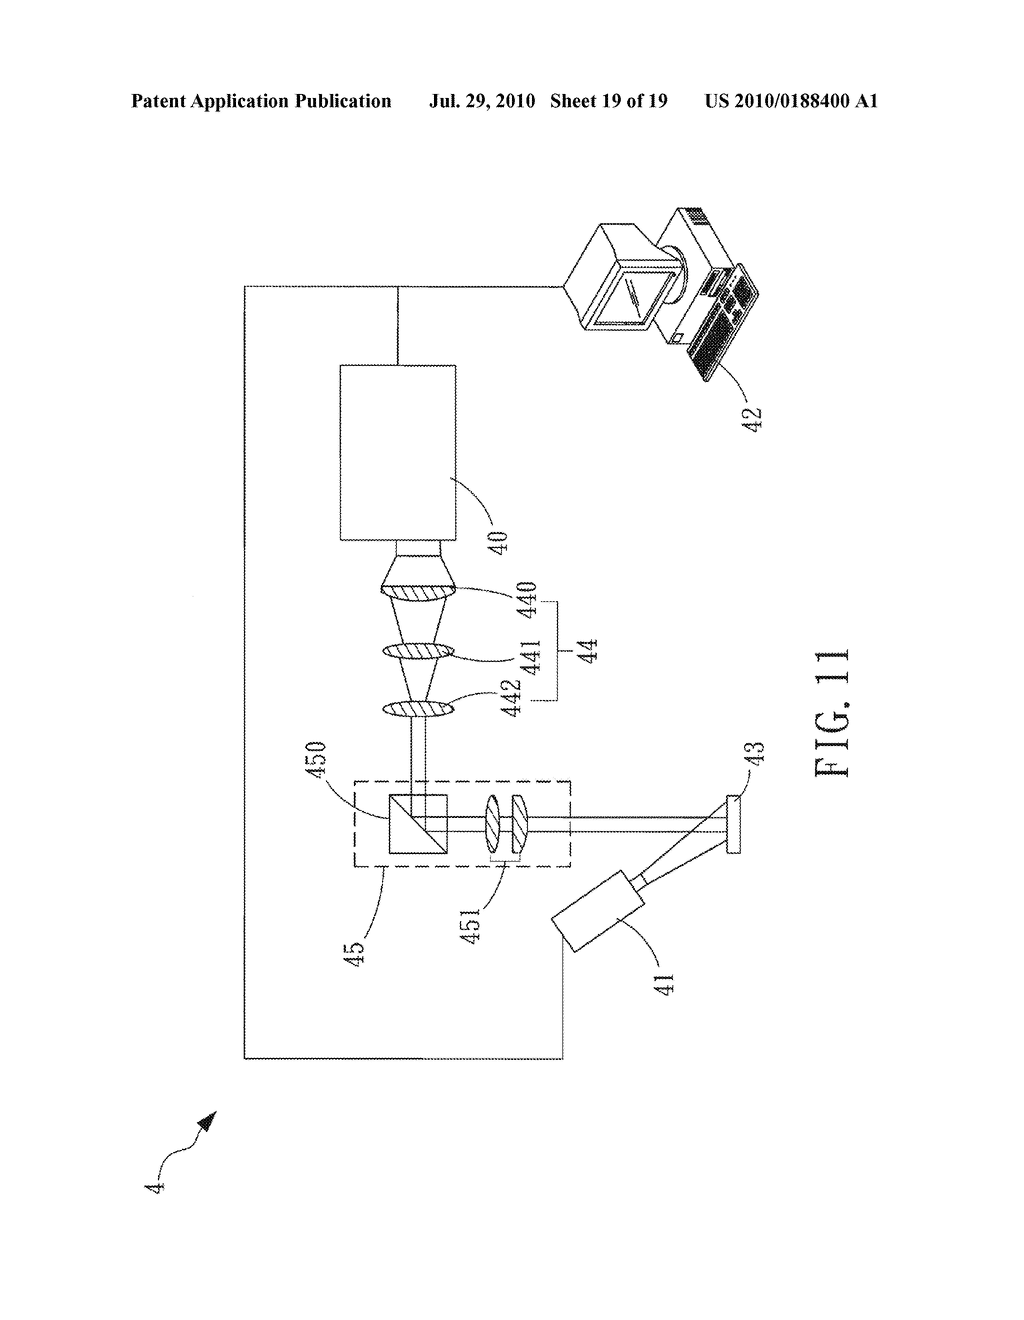 METHOD FOR SIMULTANEOUS HUE PHASE-SHIFTING AND SYSTEM FOR 3-D SURFACE PROFILOMETRY USING THE SAME - diagram, schematic, and image 20